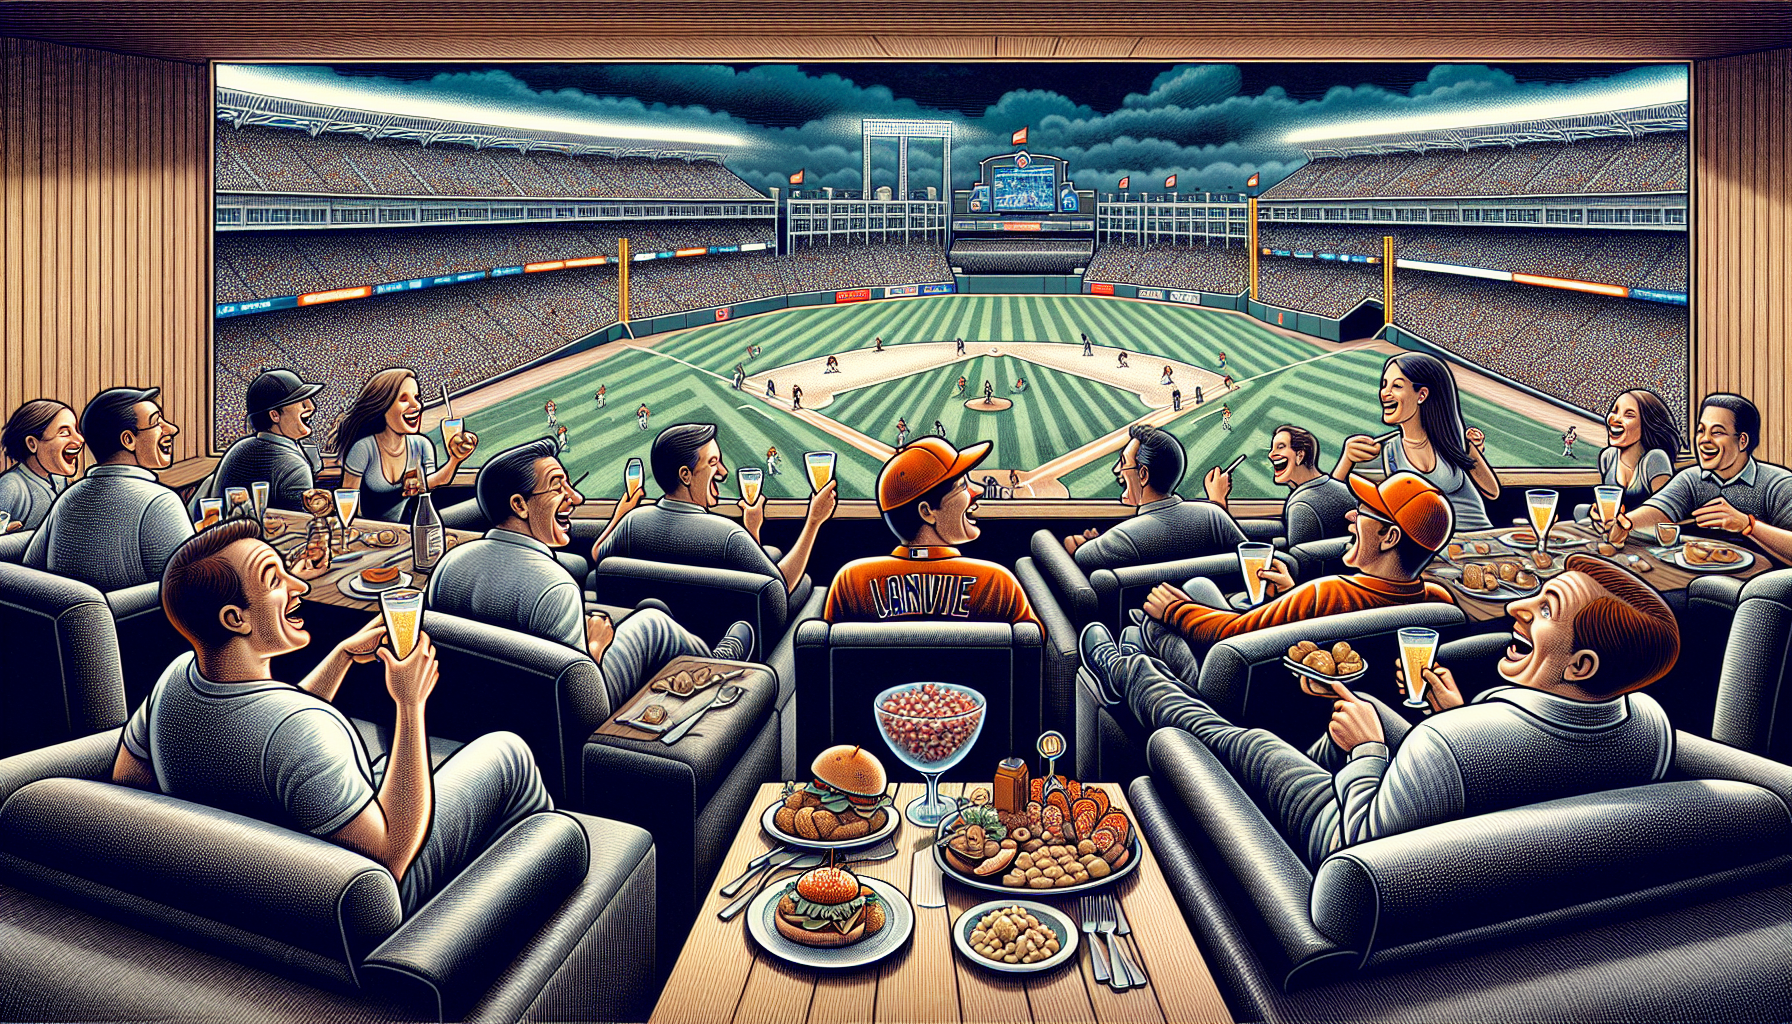 Illustration of a group enjoying the exclusive experience of luxury suite seating at a baseball game